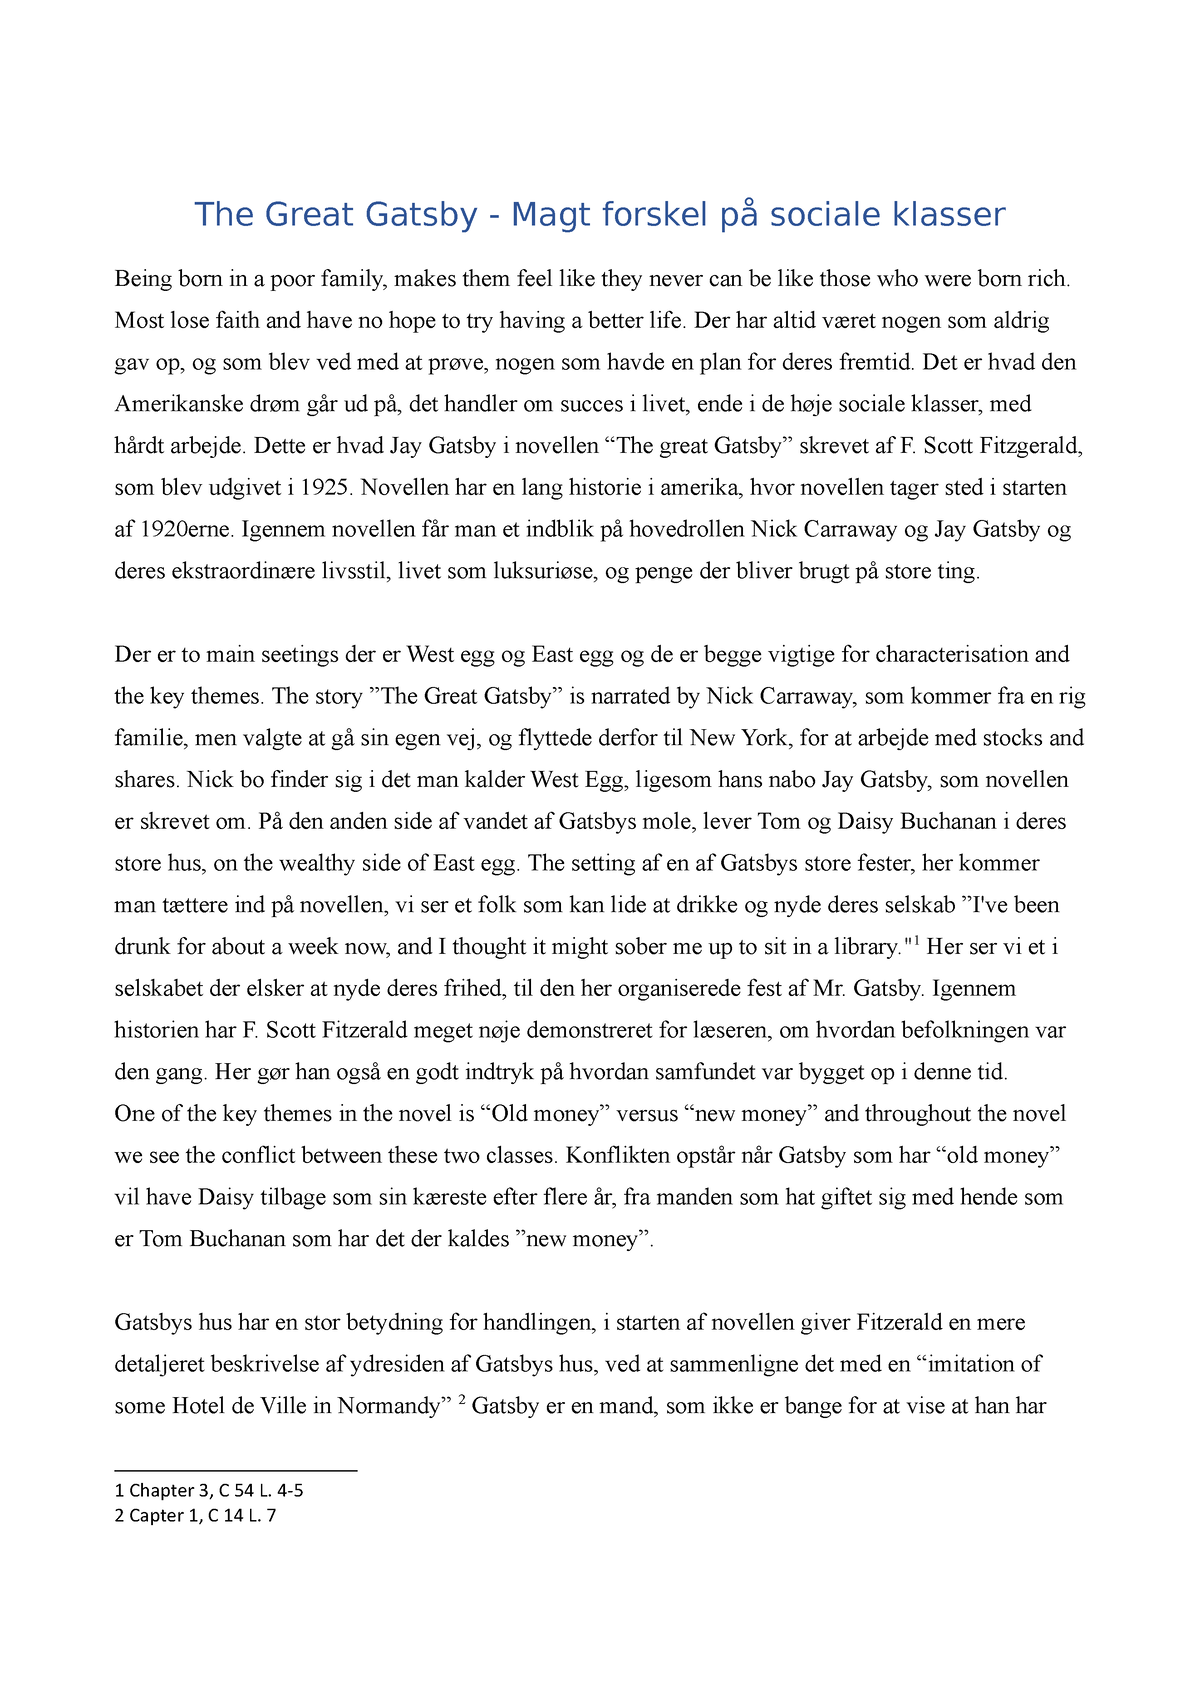 the great gatsby analytical essay